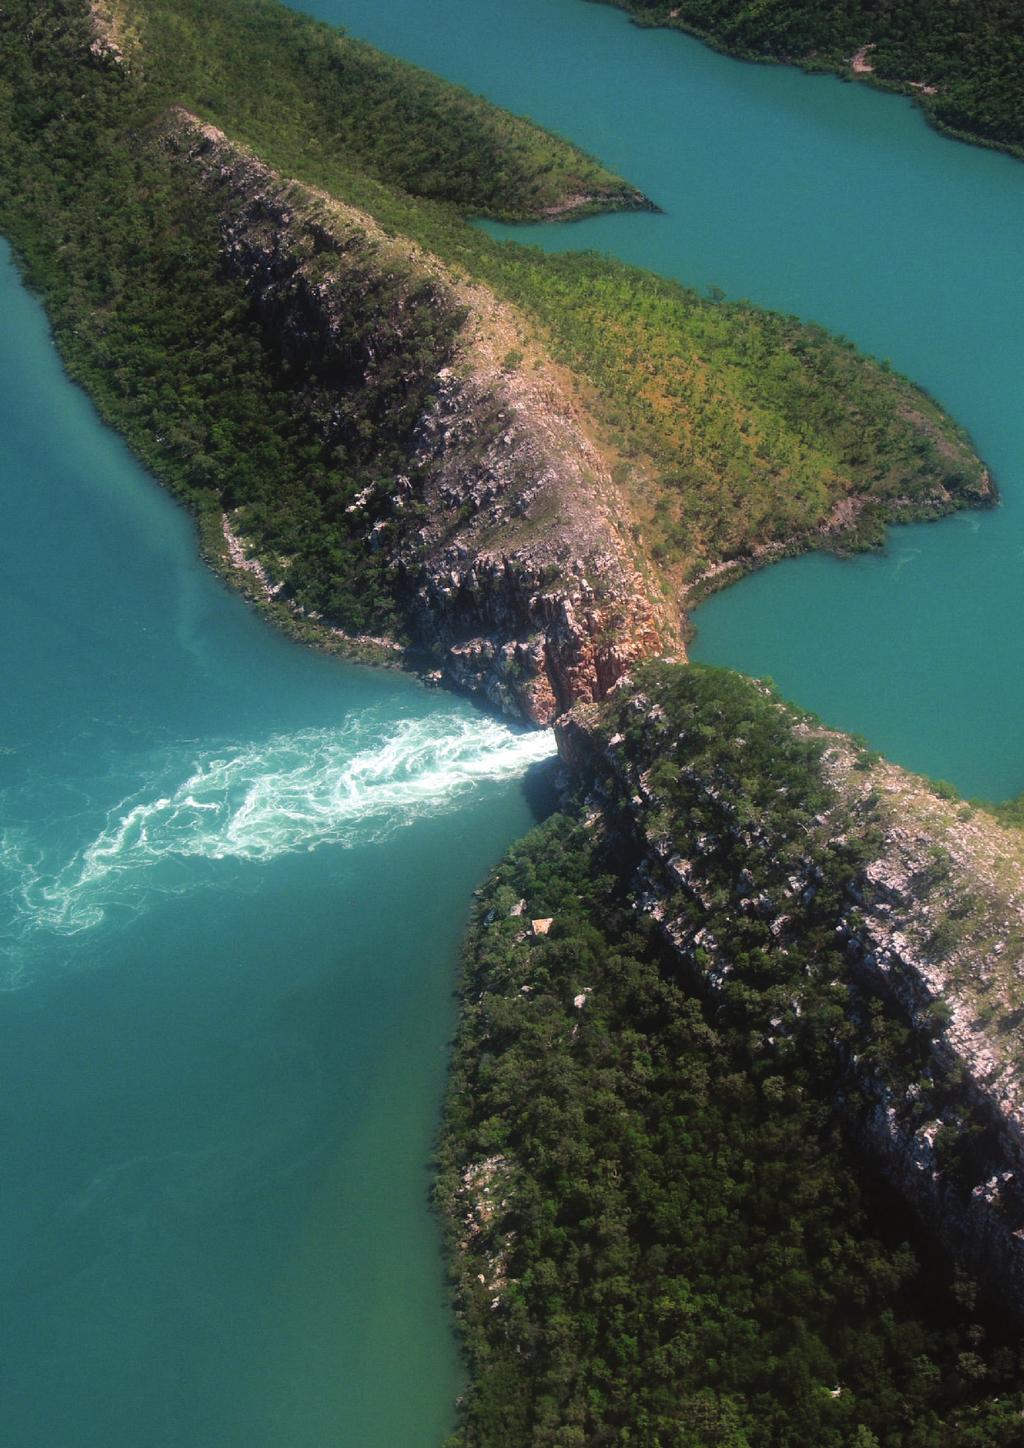 Why cruise to the Kimberley with PONANT?